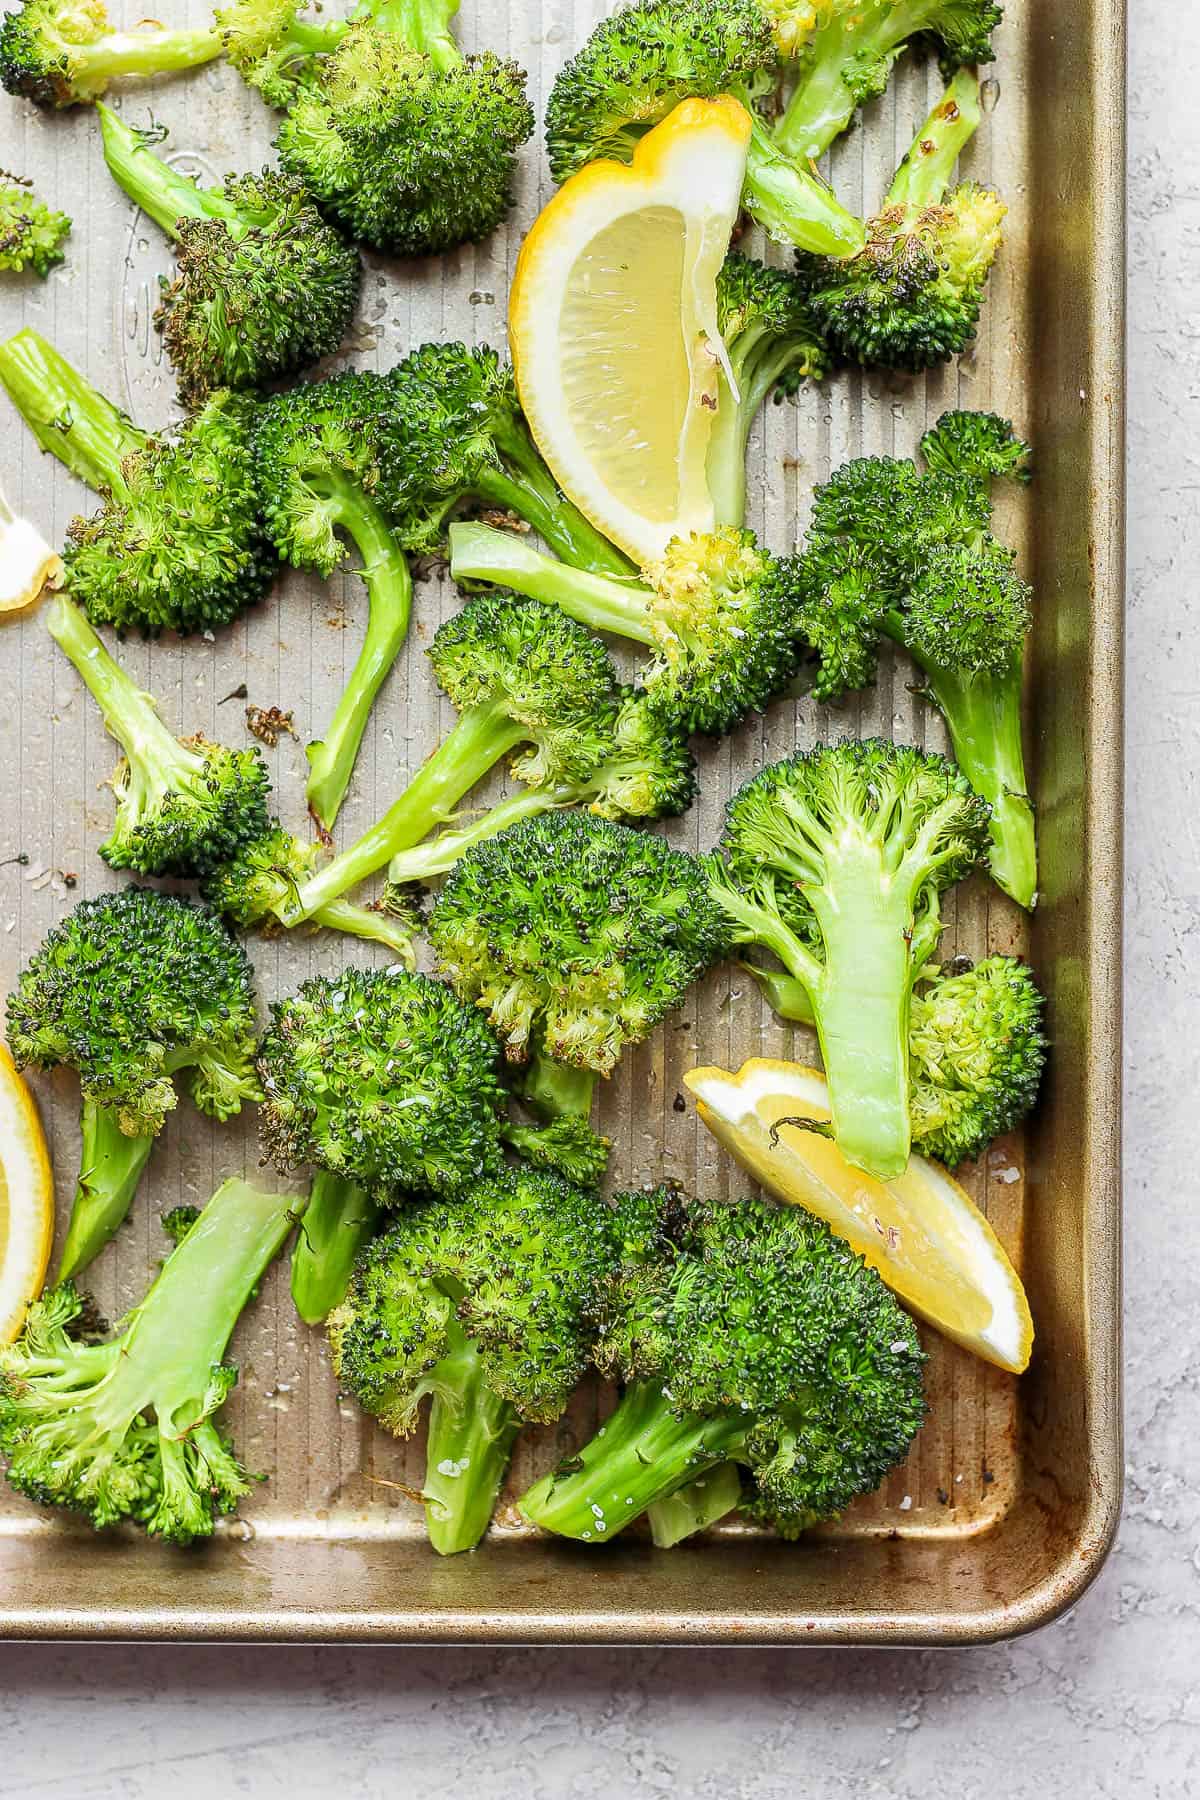 Oven roasted broccoli on tray with lemons